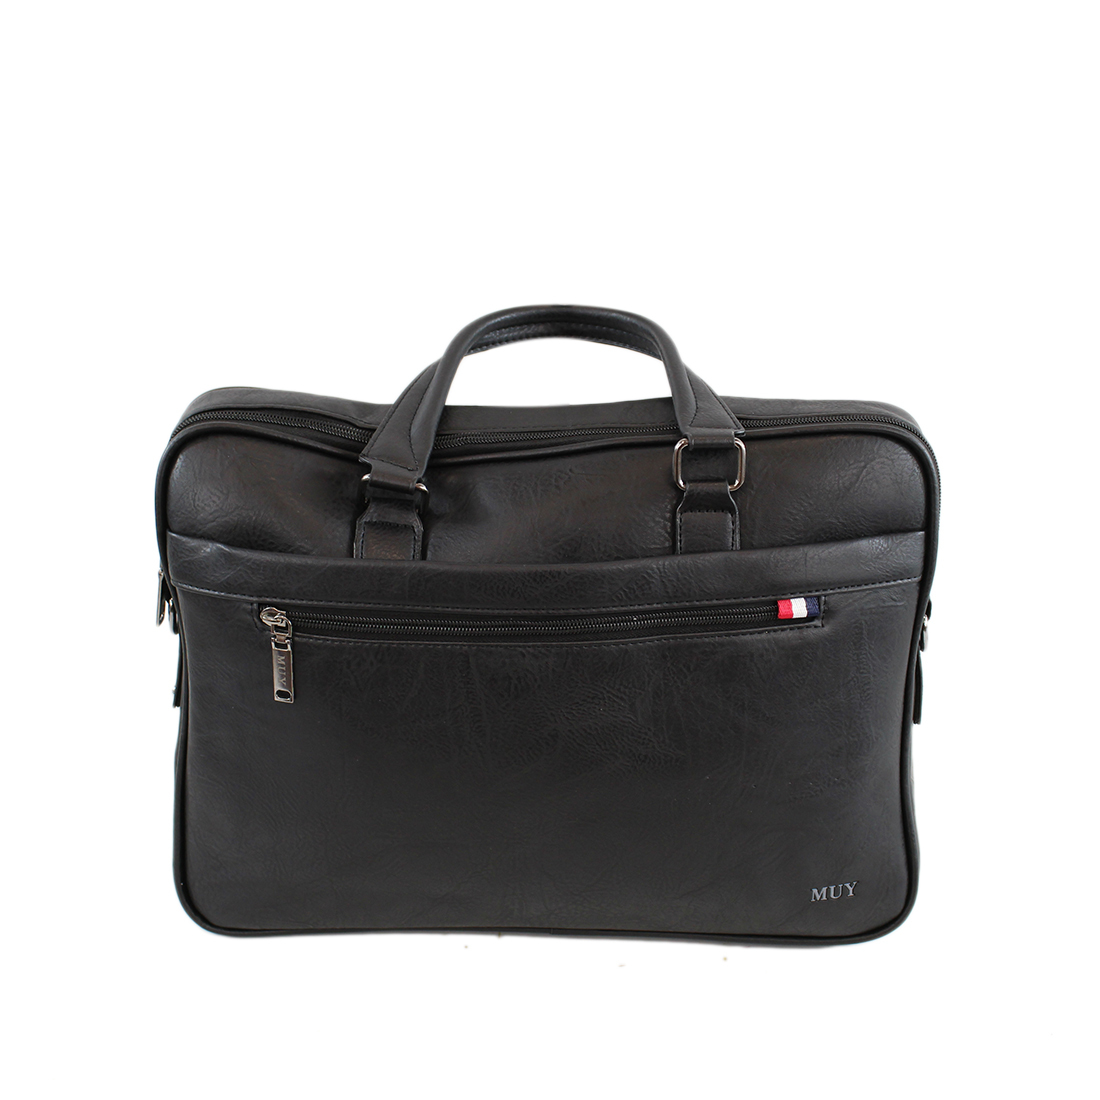 Classic leather briefcase laptop